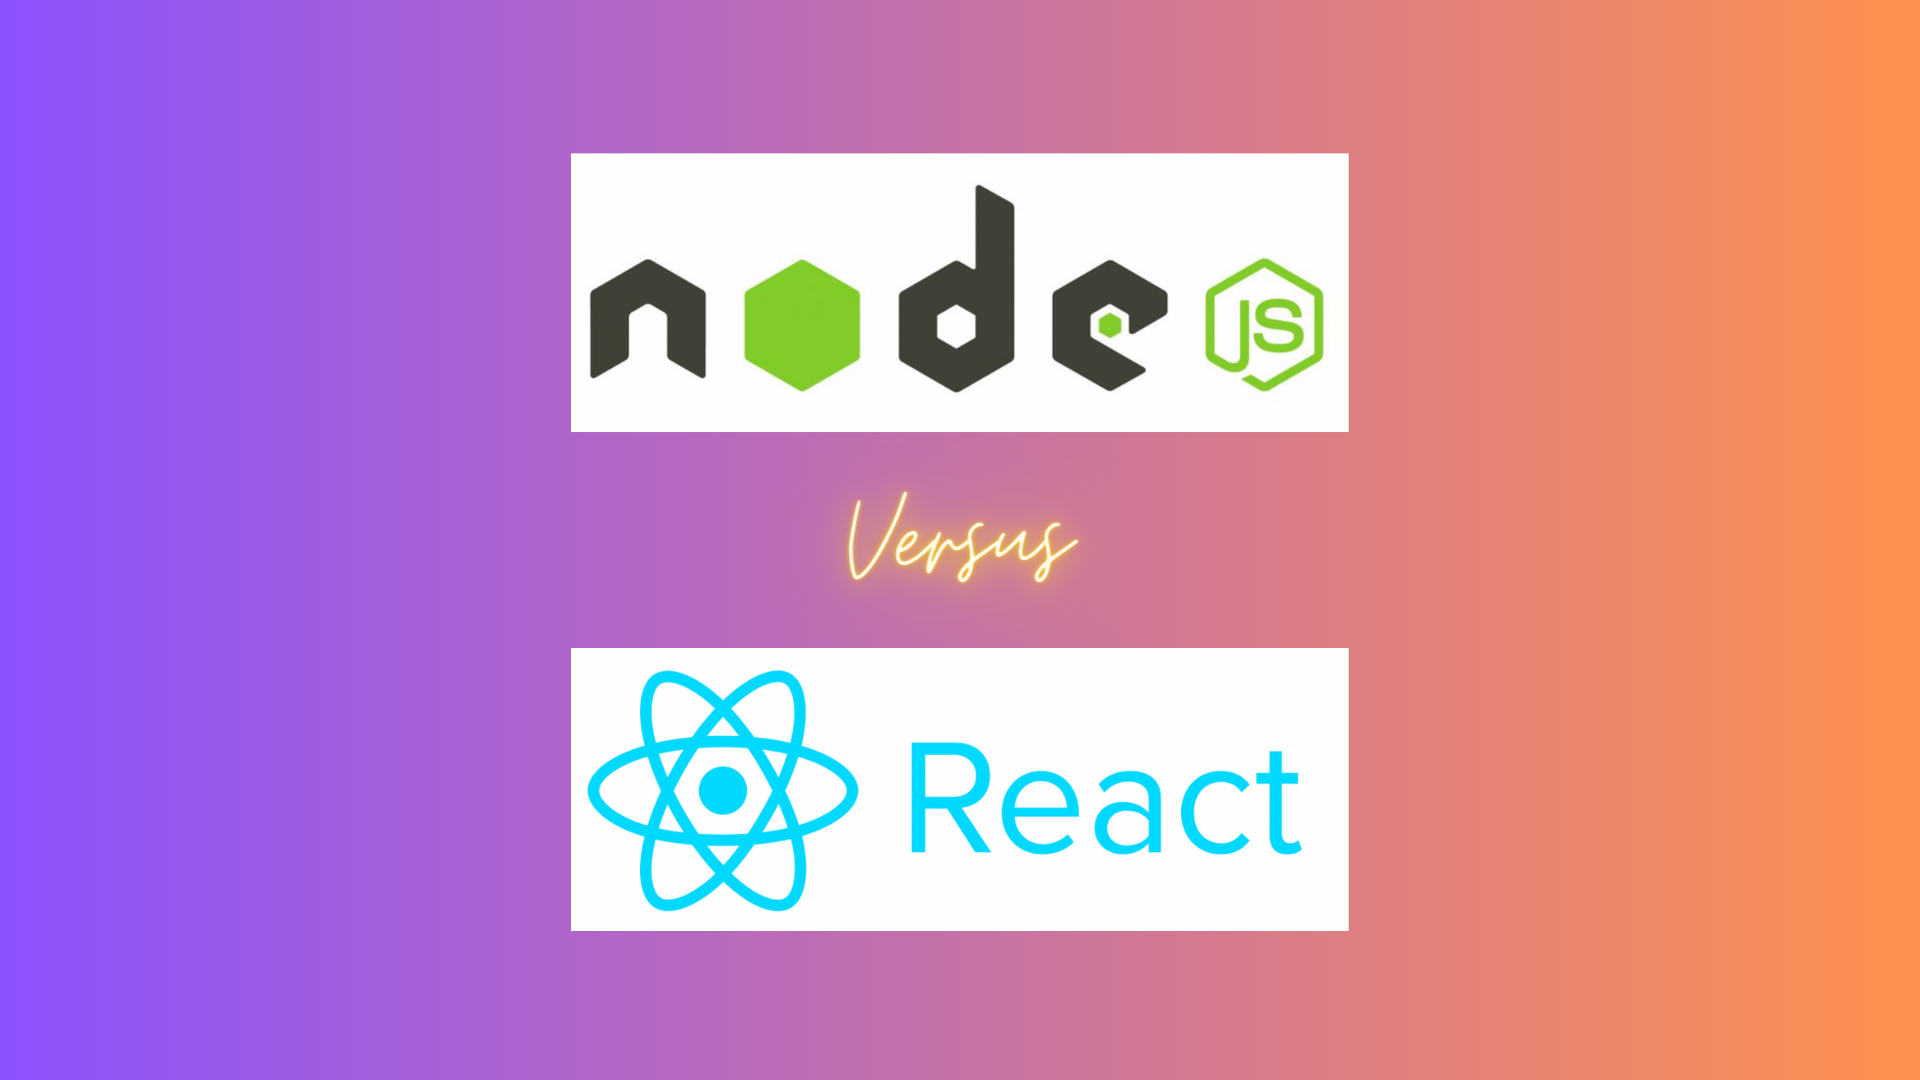 Node.js vs React logos on a blended purple and yellow background.